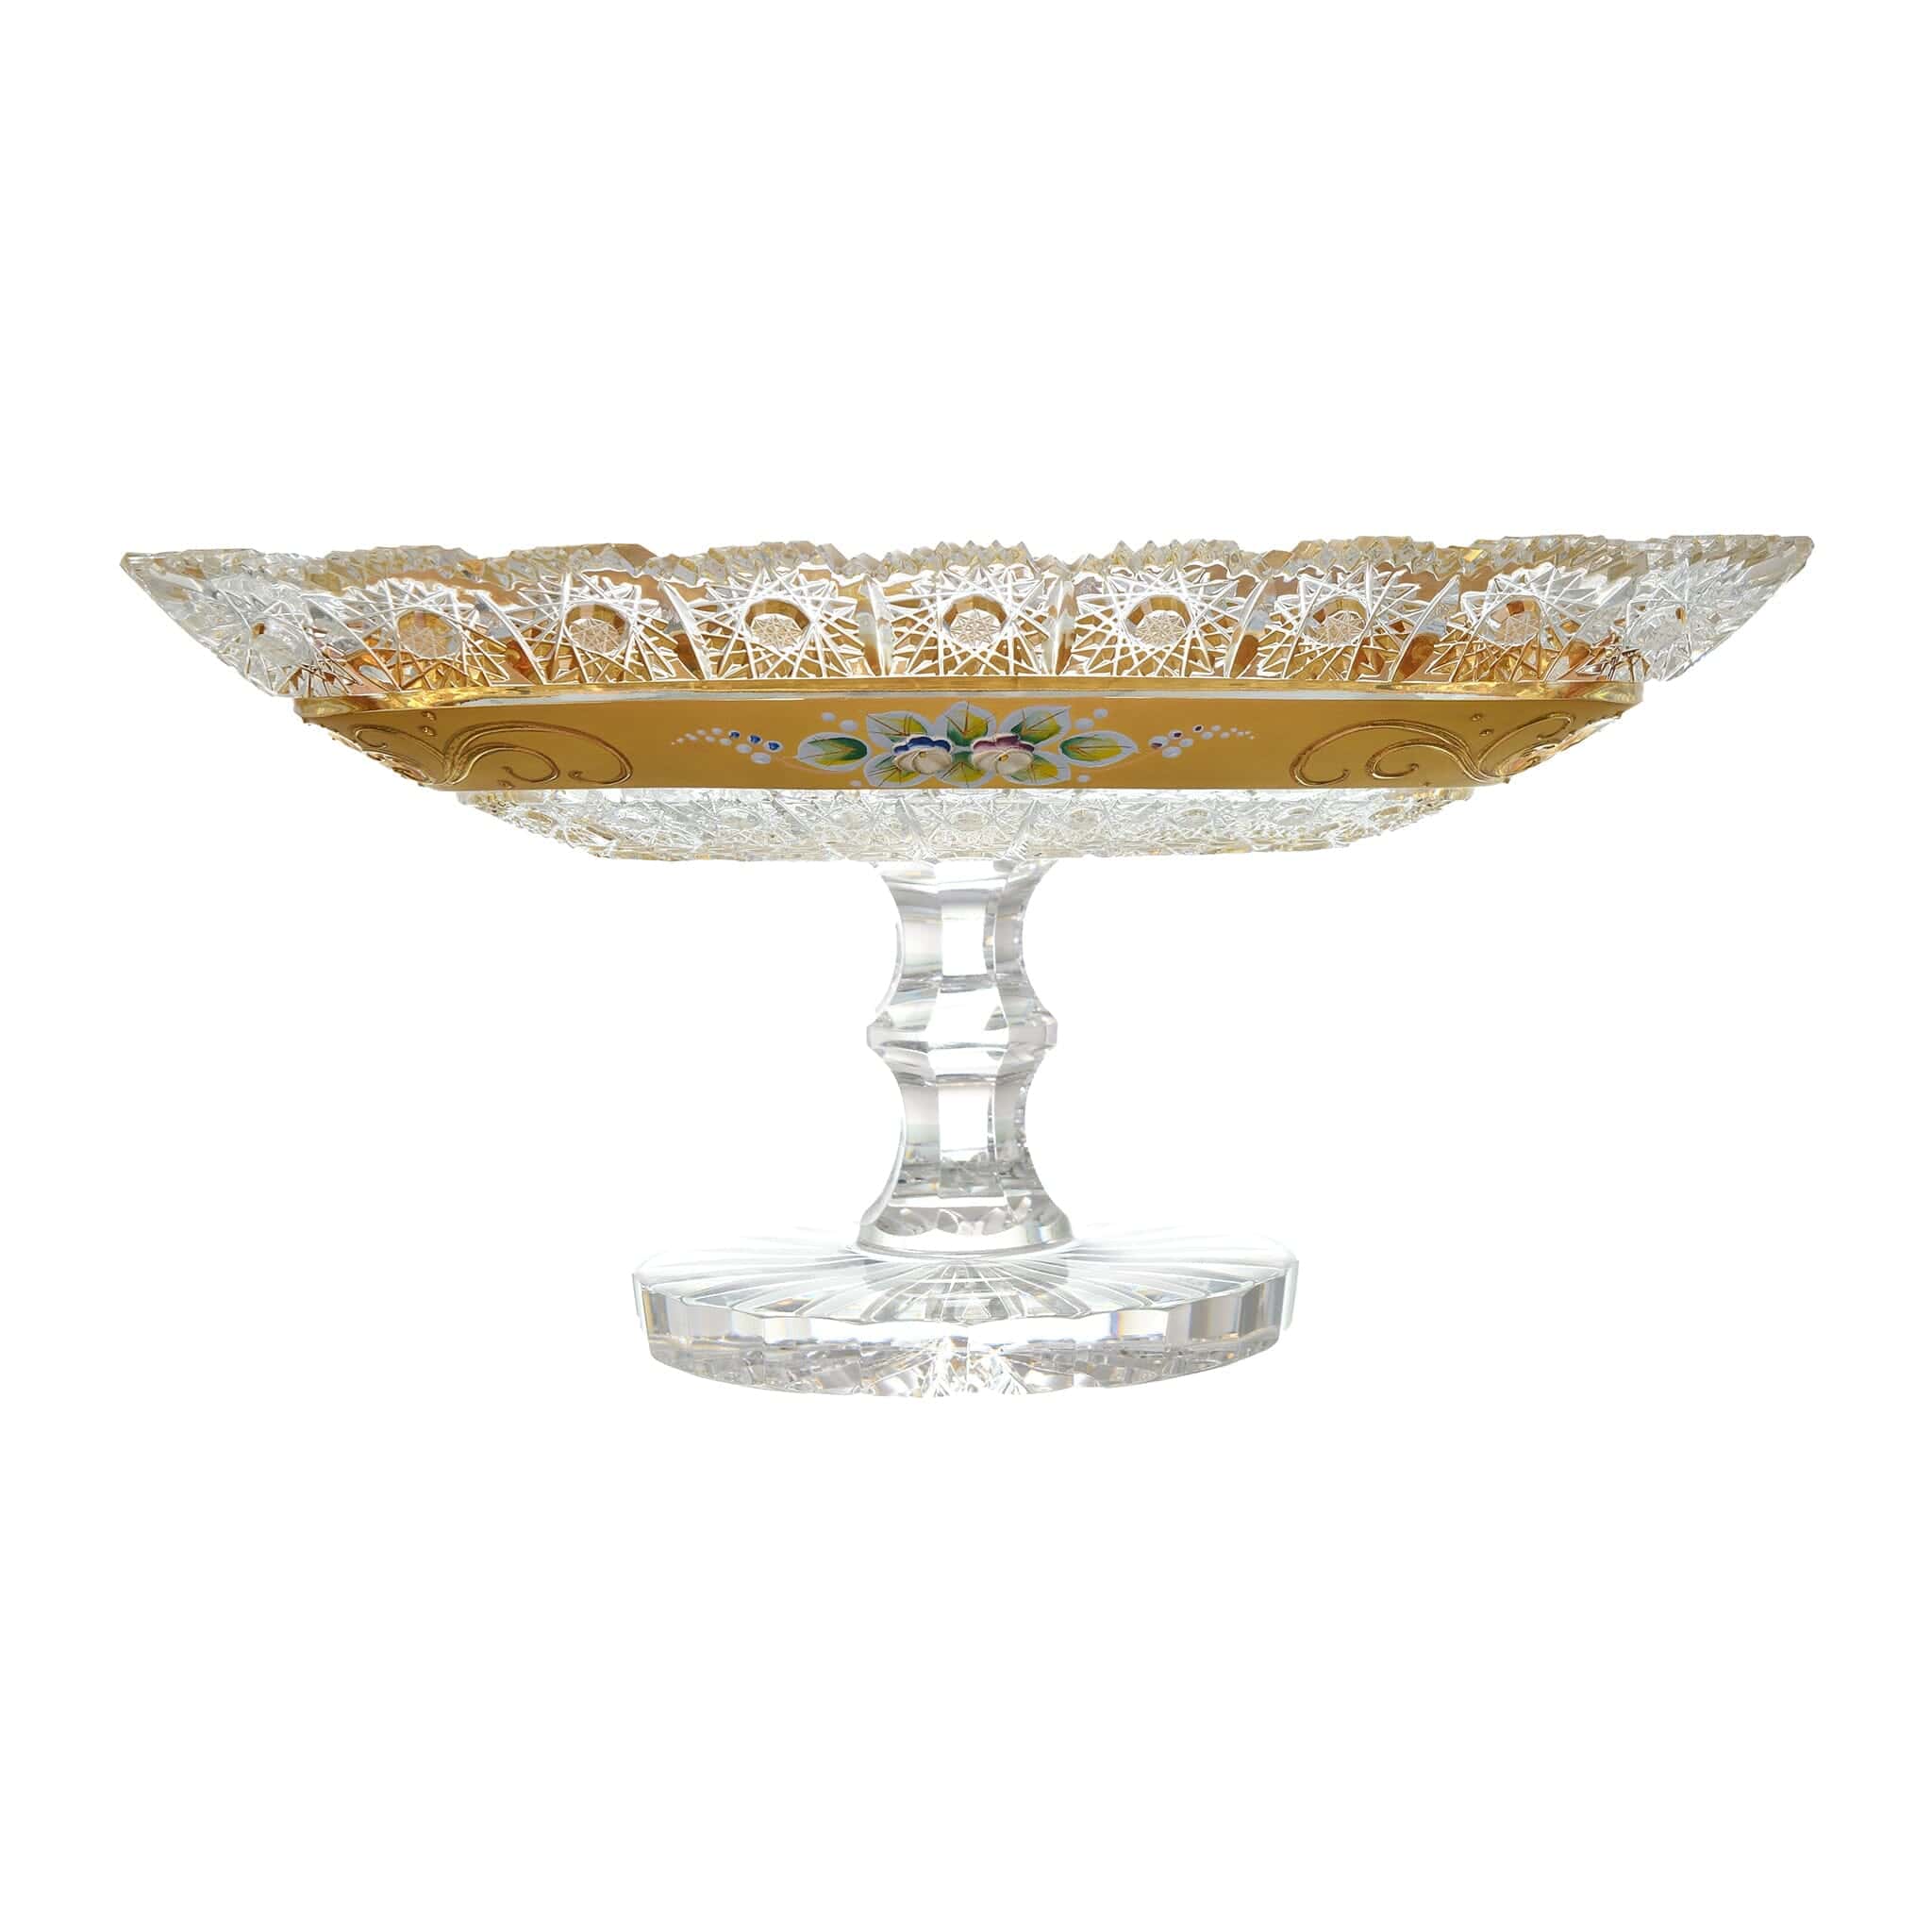 Bohemia Crystal - Triangular Shaped Plate with Base - Gold & Floral Design - 33cm - 270004314